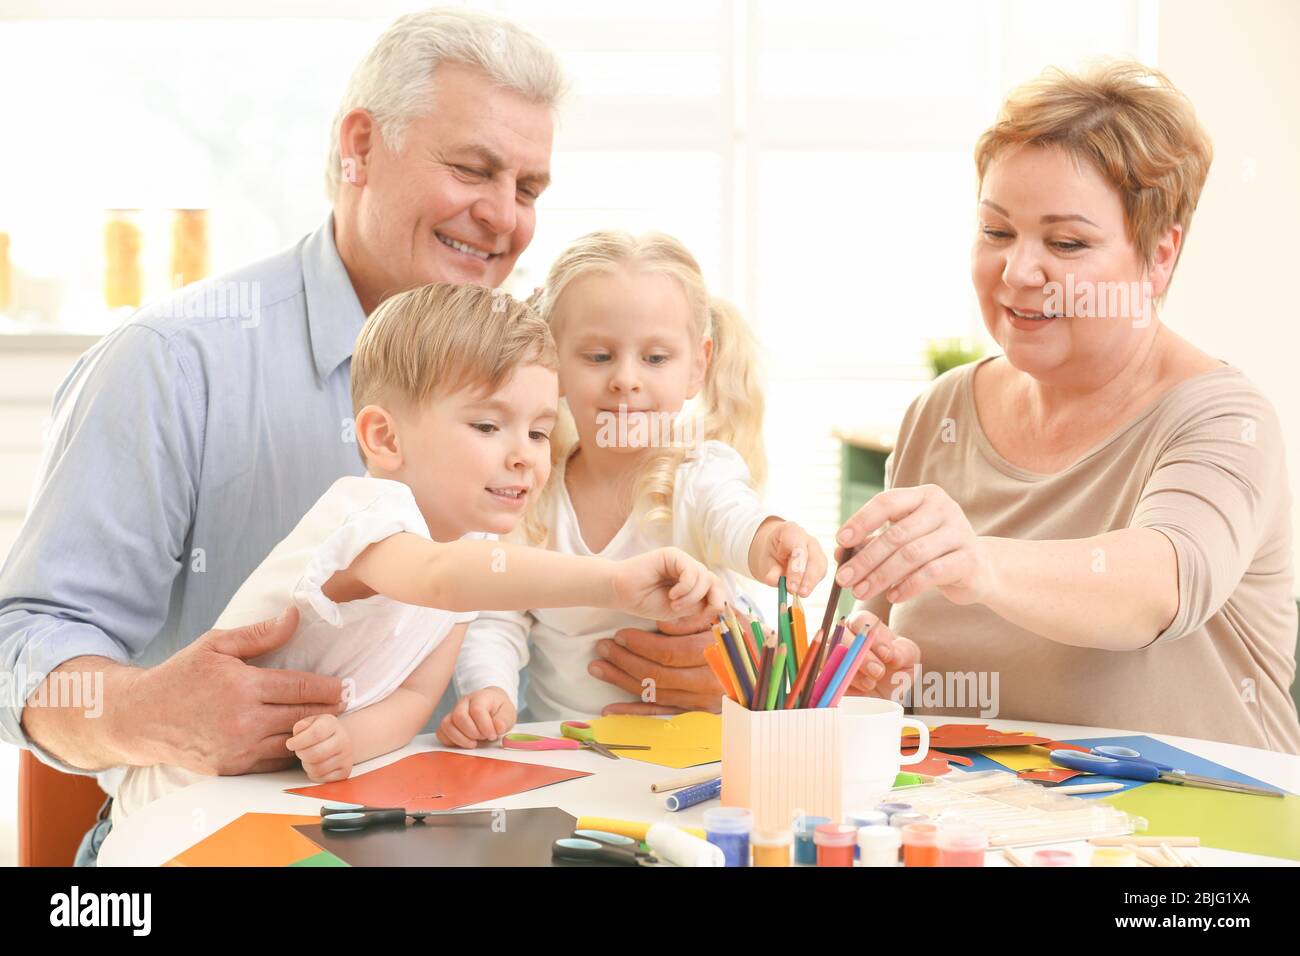 Grandparents and grandchildren spending time together at home Stock Photo